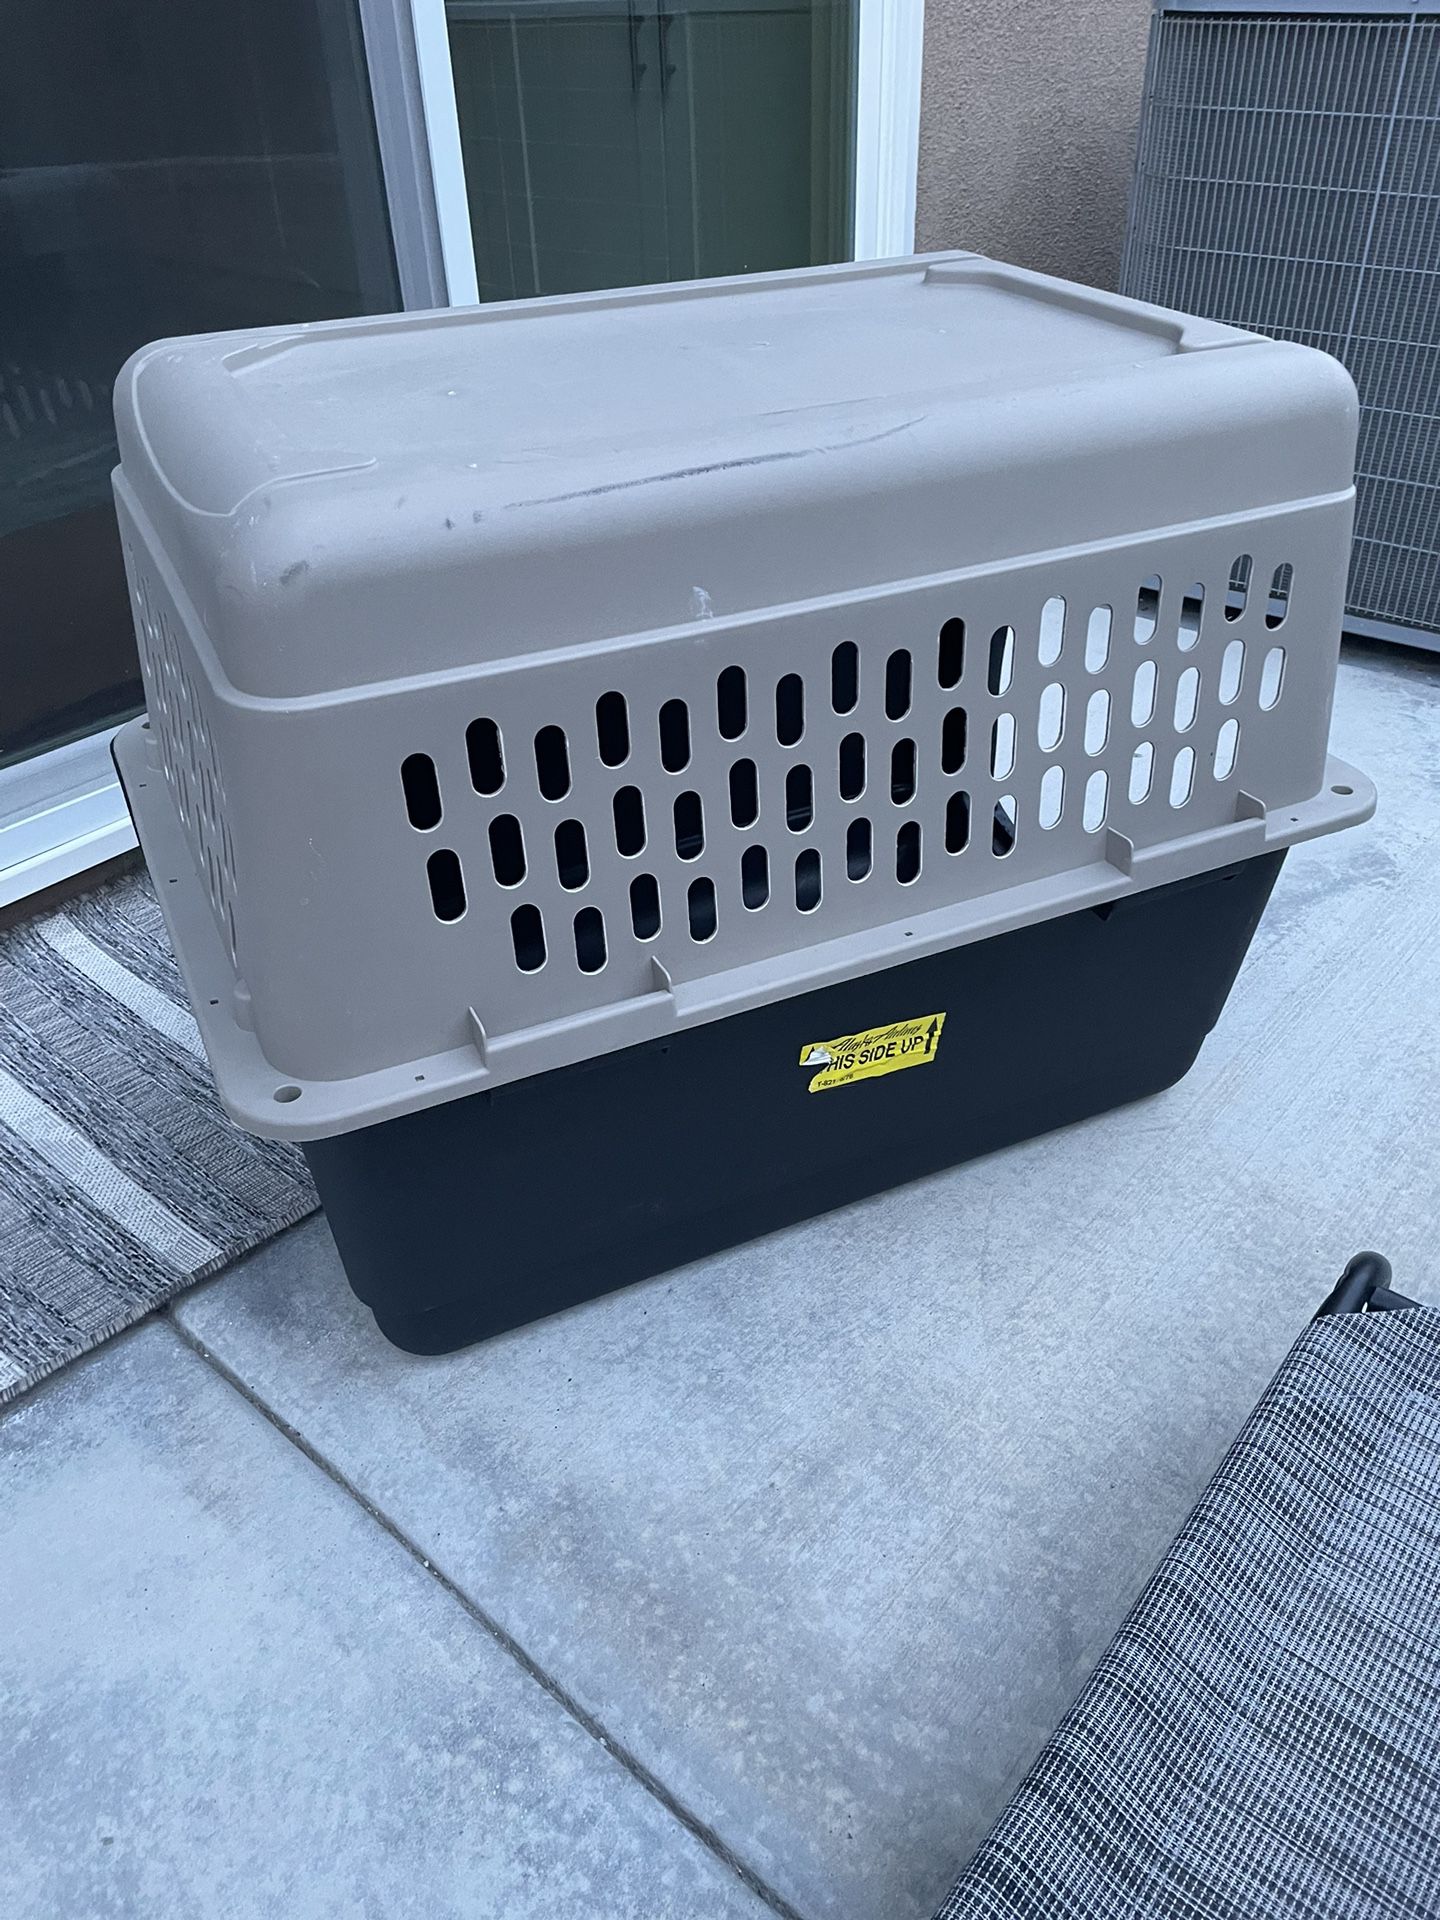 Portable Dog Kennels - Top Paw Brand